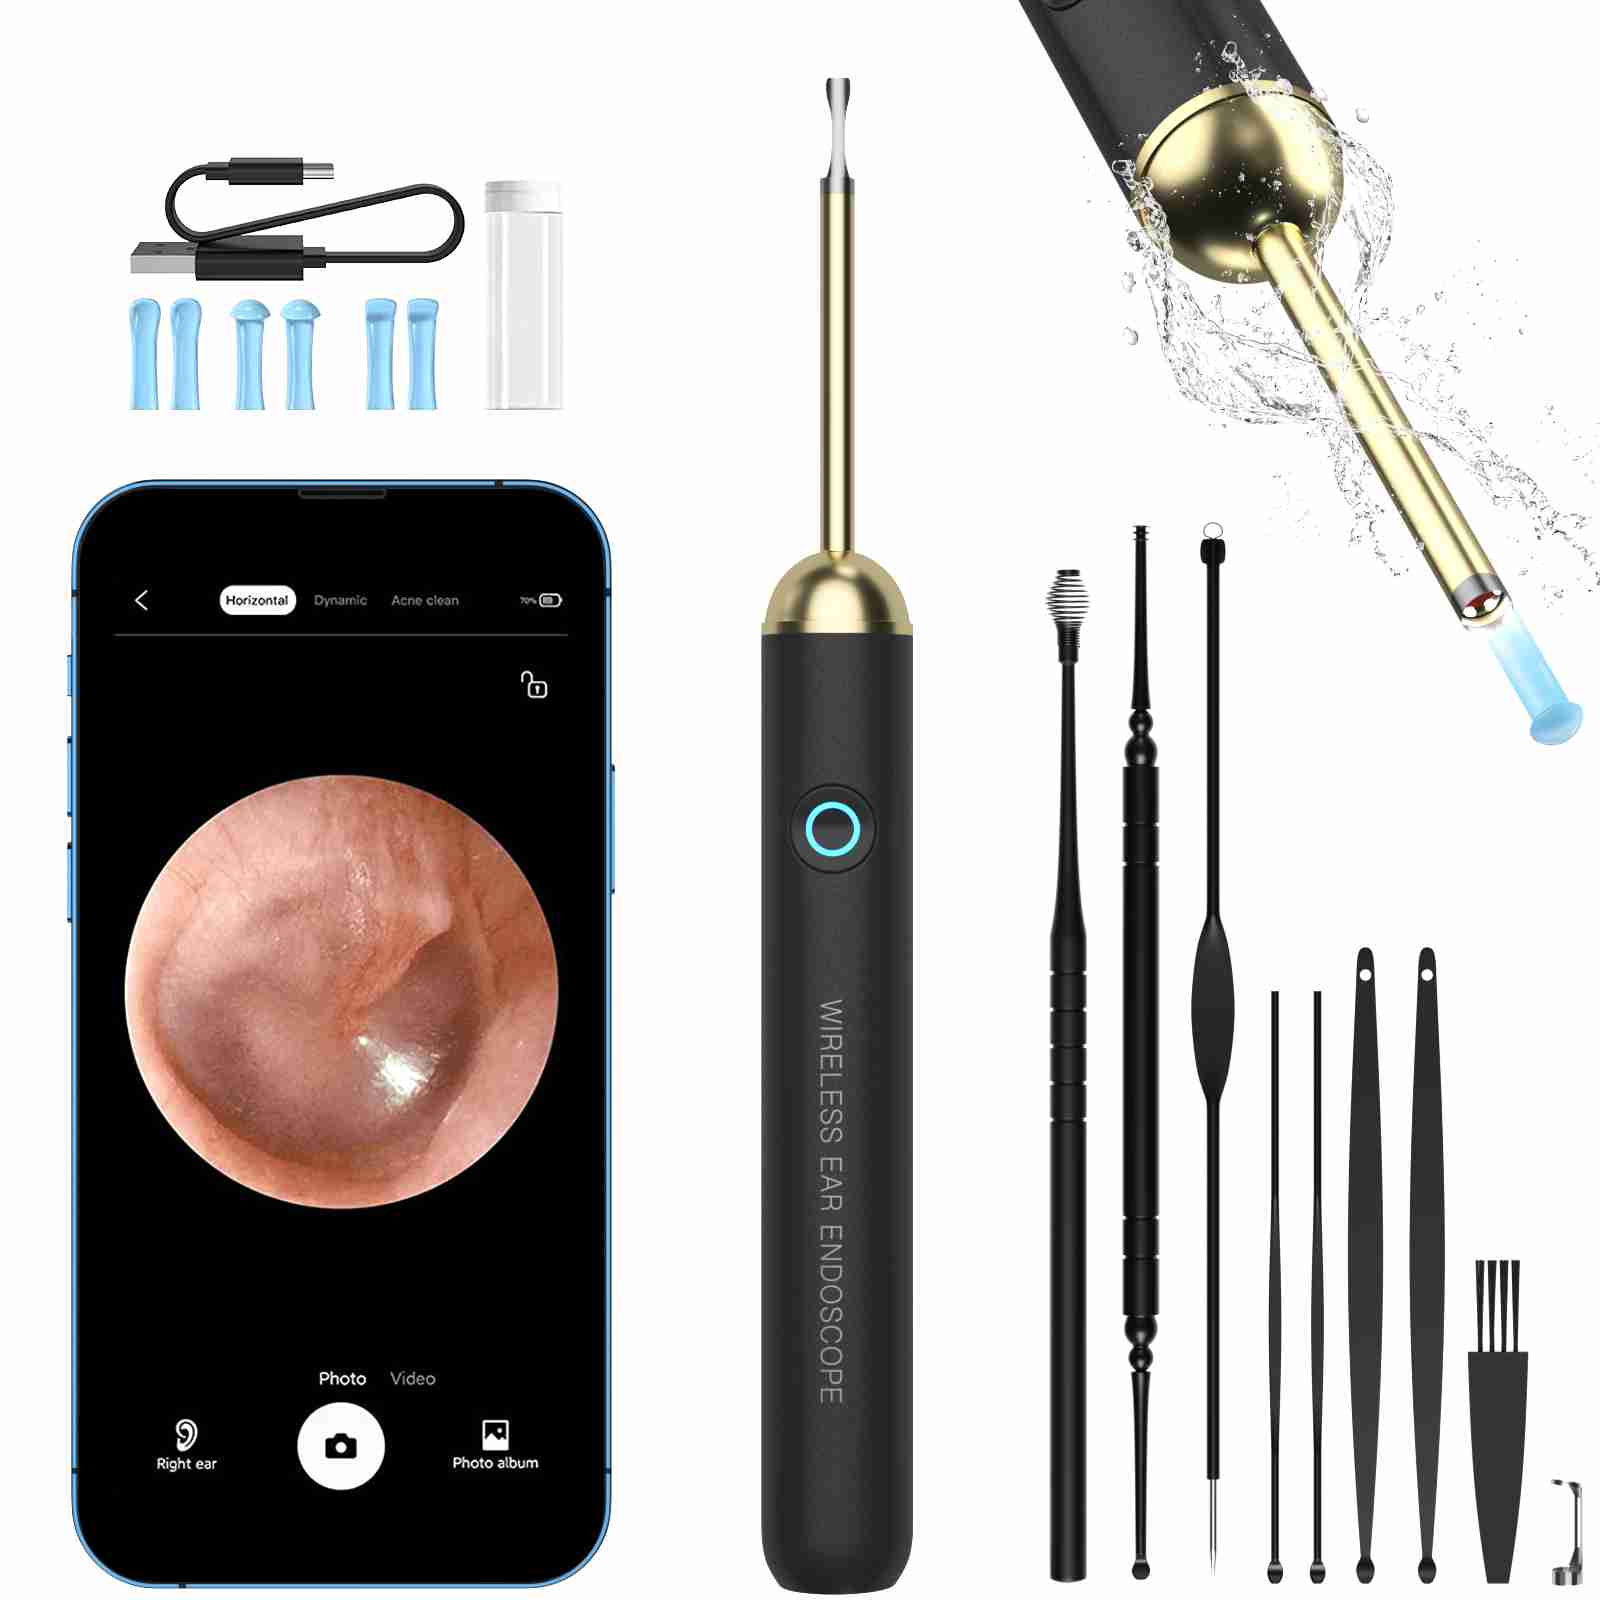 ear-wax-removal-ear-wax-removal-tool-ear-cleaner with cash back rebate